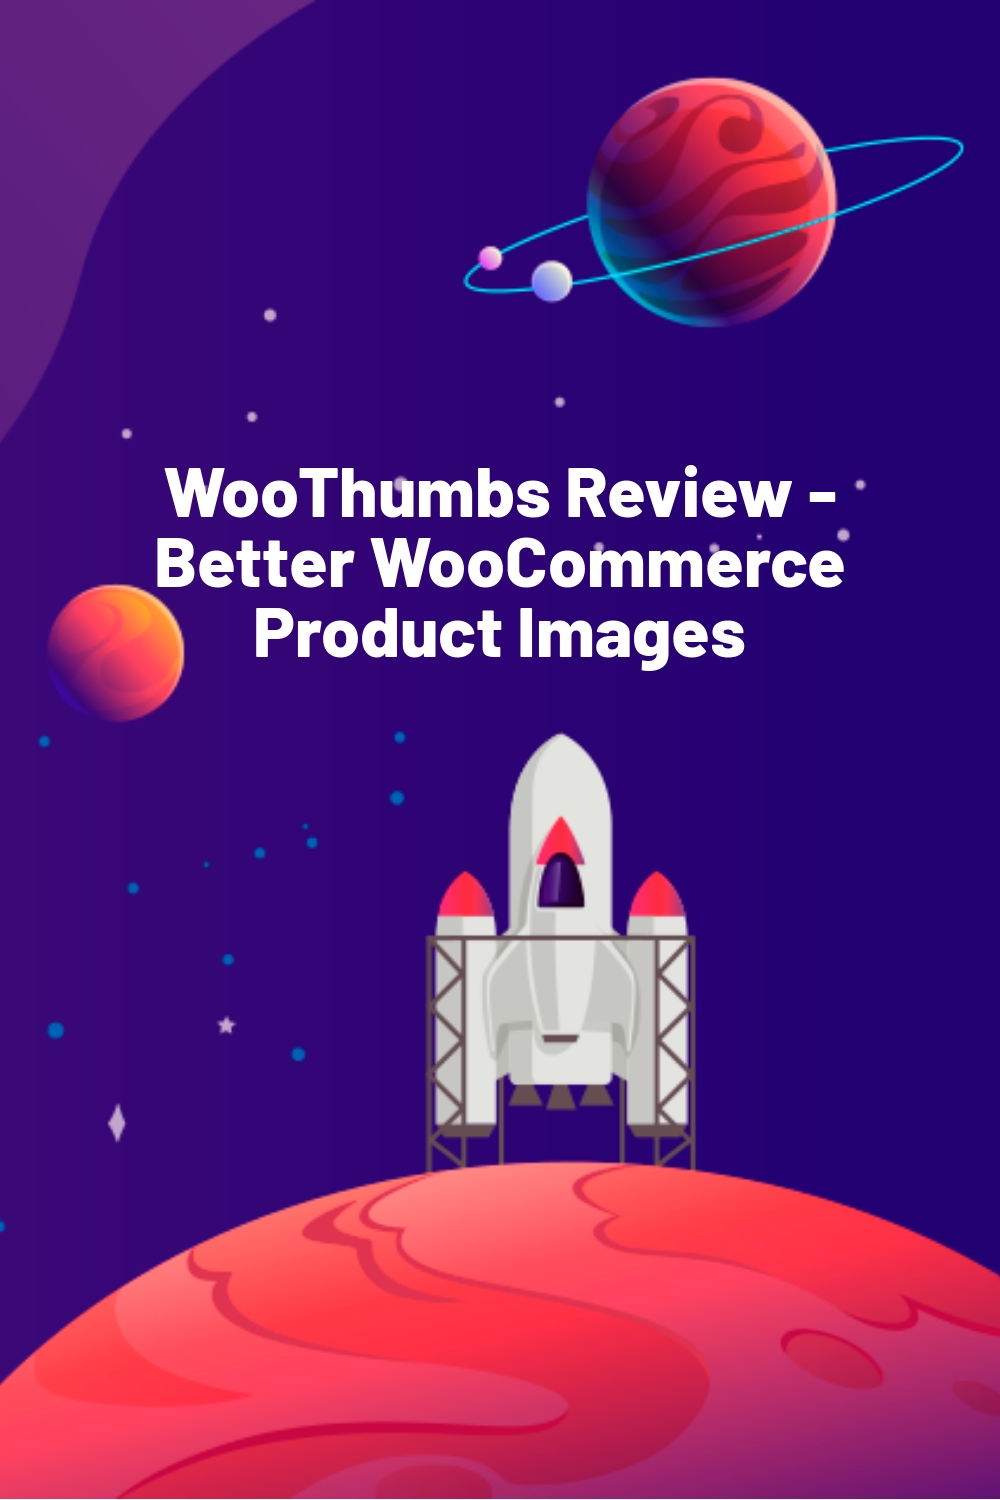 WooThumbs Review – Better WooCommerce Product Images